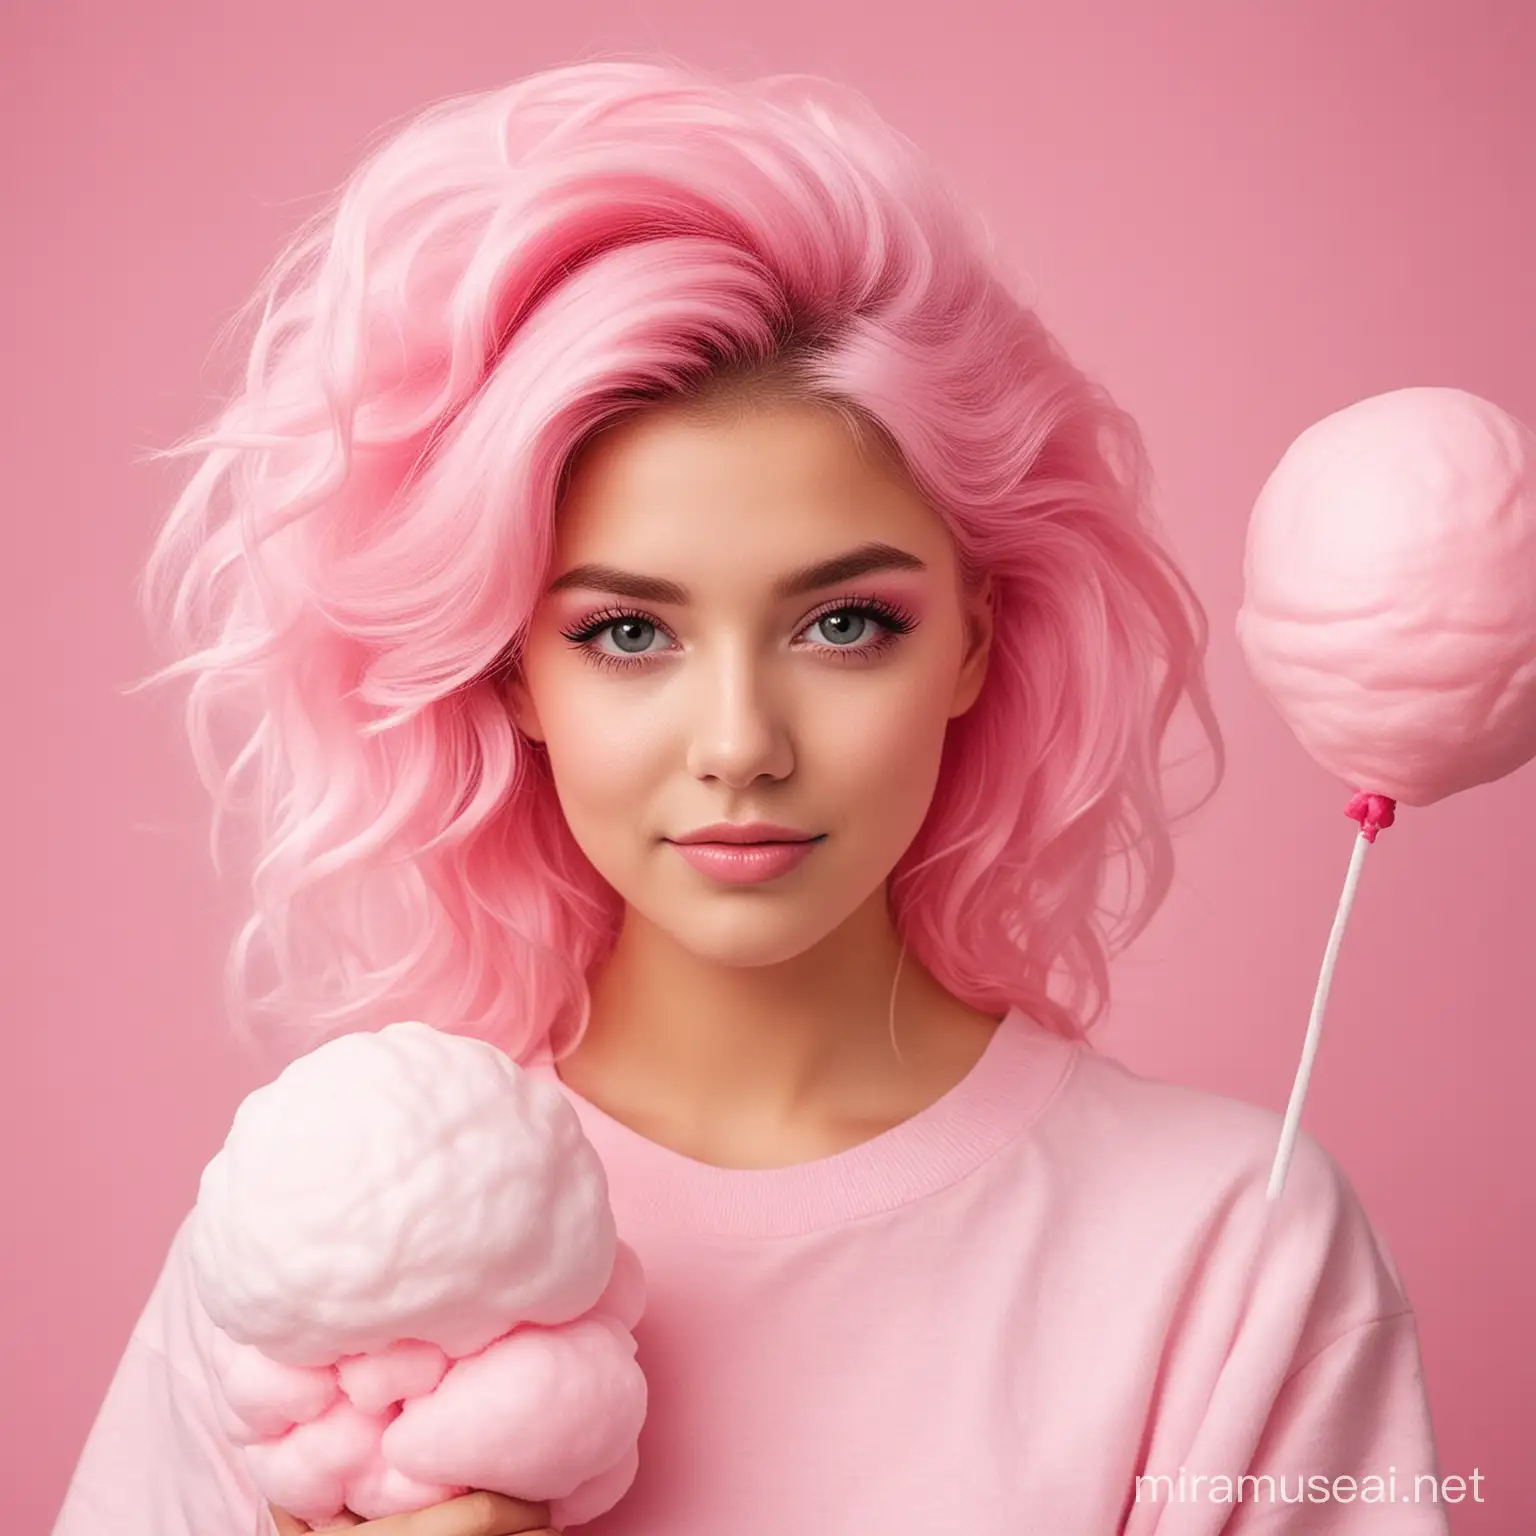 A girl in pink and cotton candy ideas